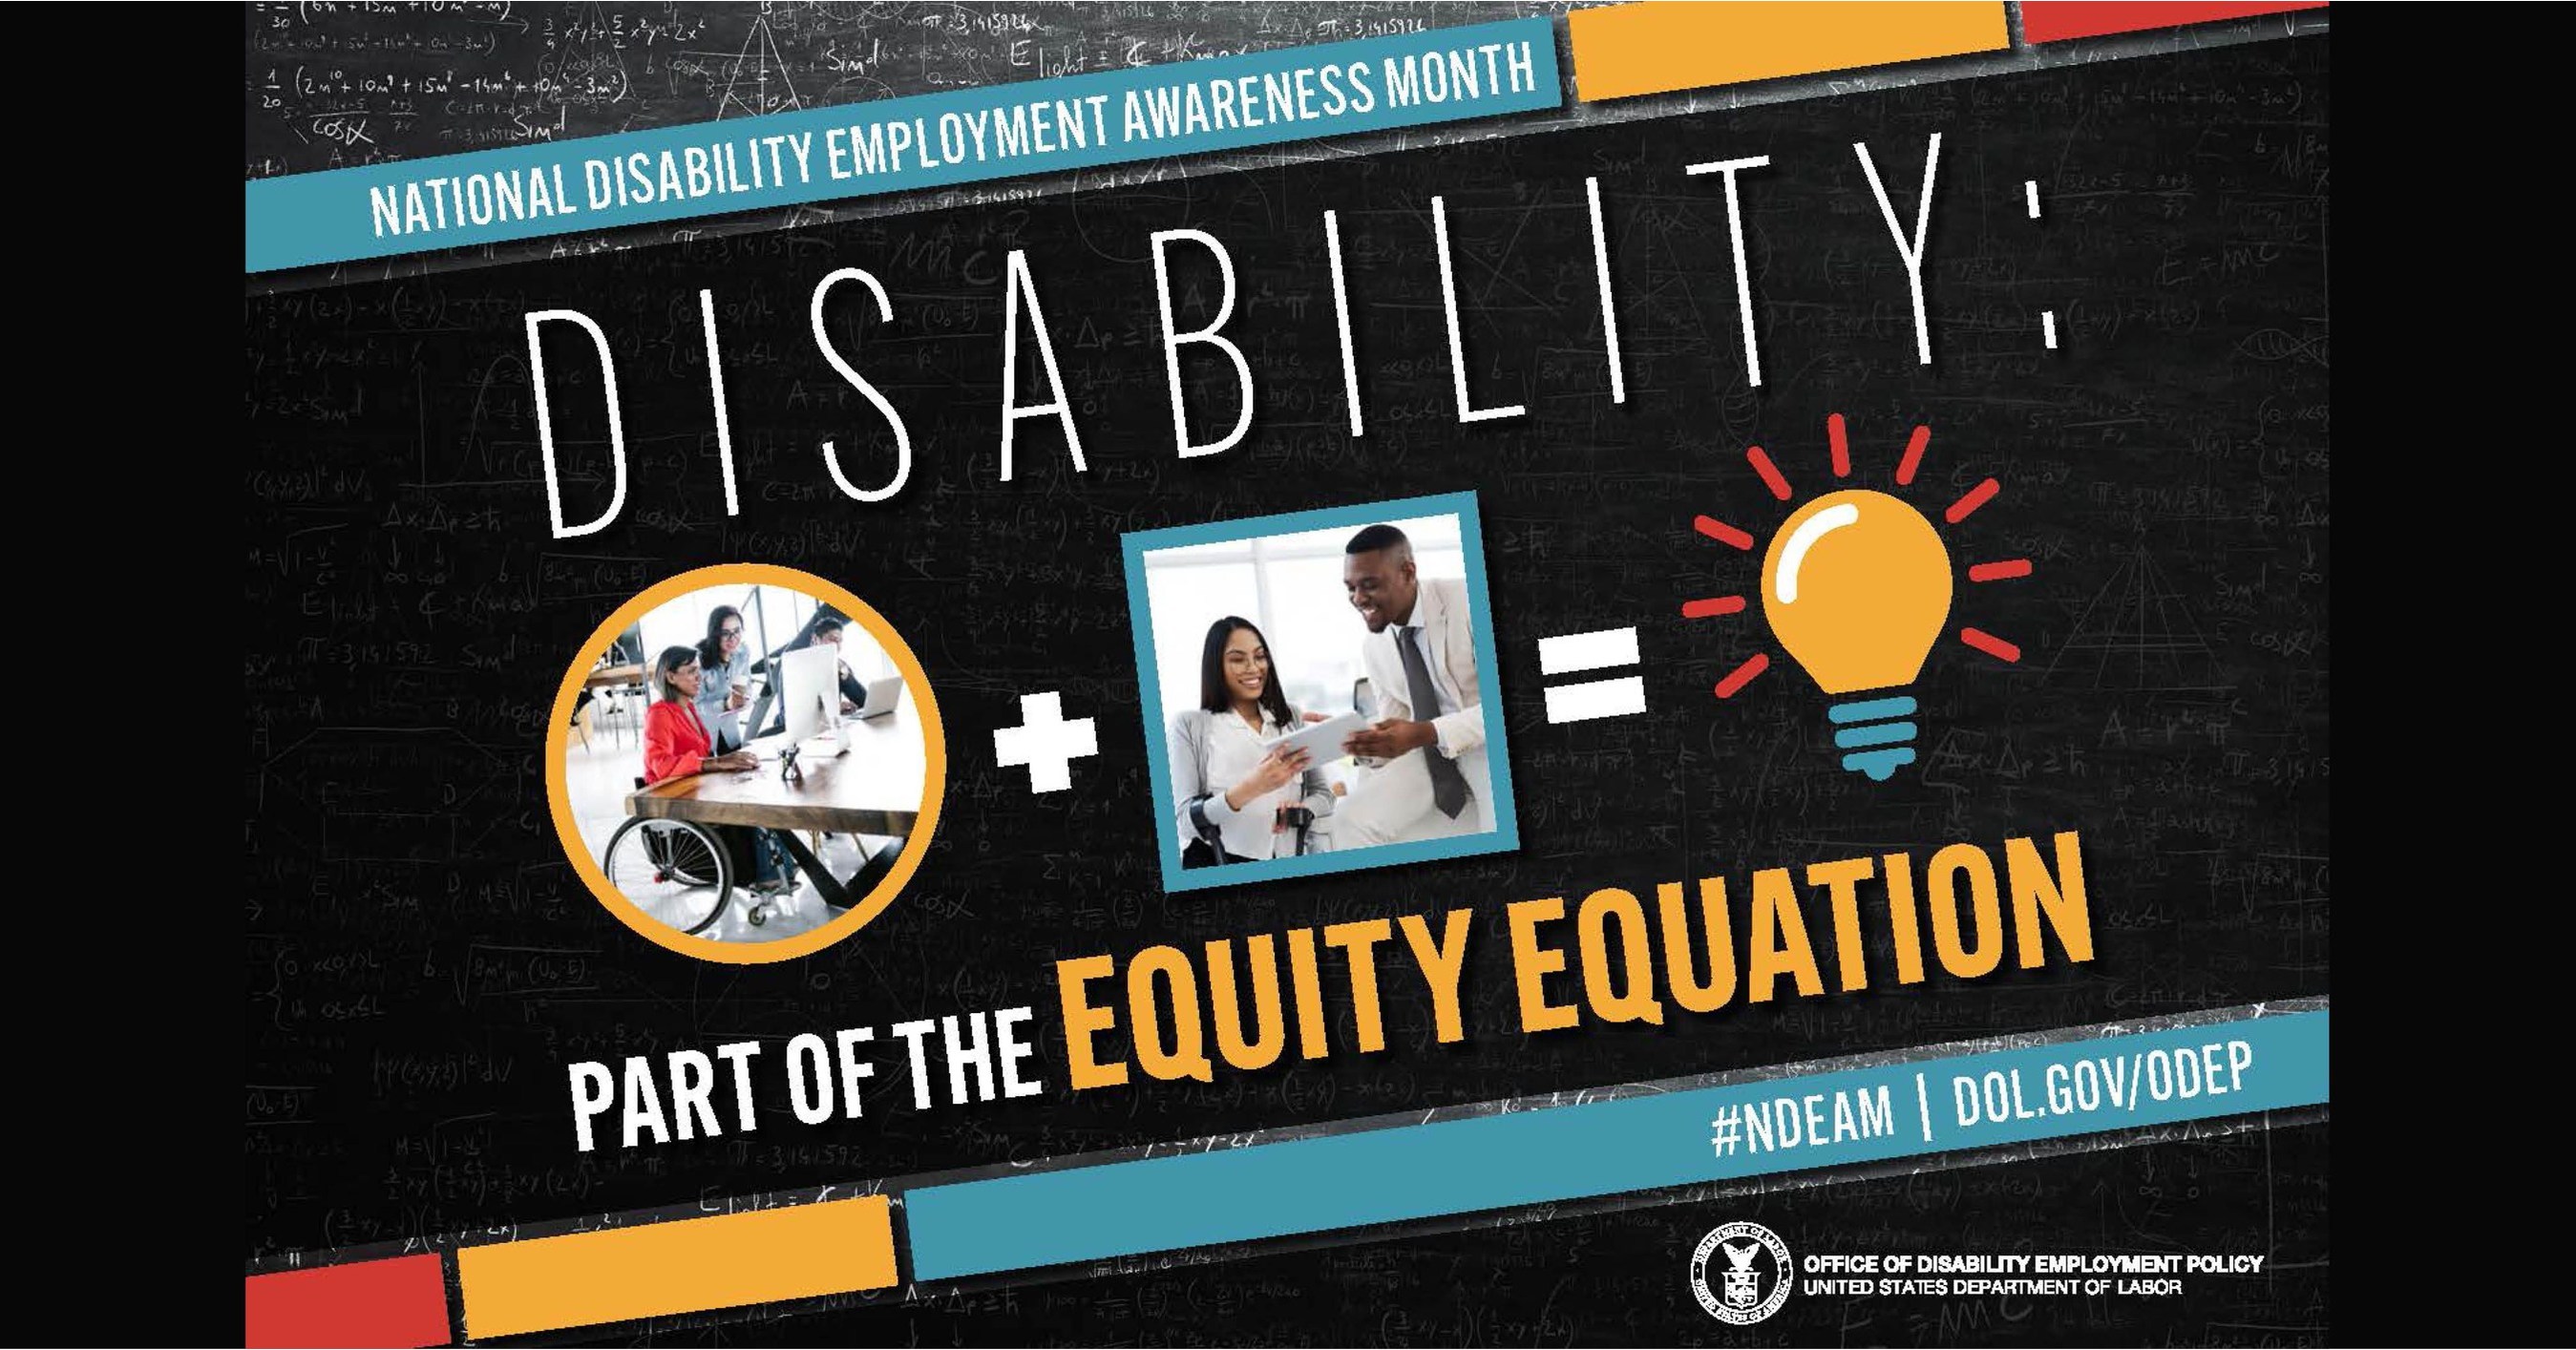 Muscular Dystrophy Association Announces Programming on Access to Employment & Inclusive Workforce Culture During National Disability Employment Awareness Month in October